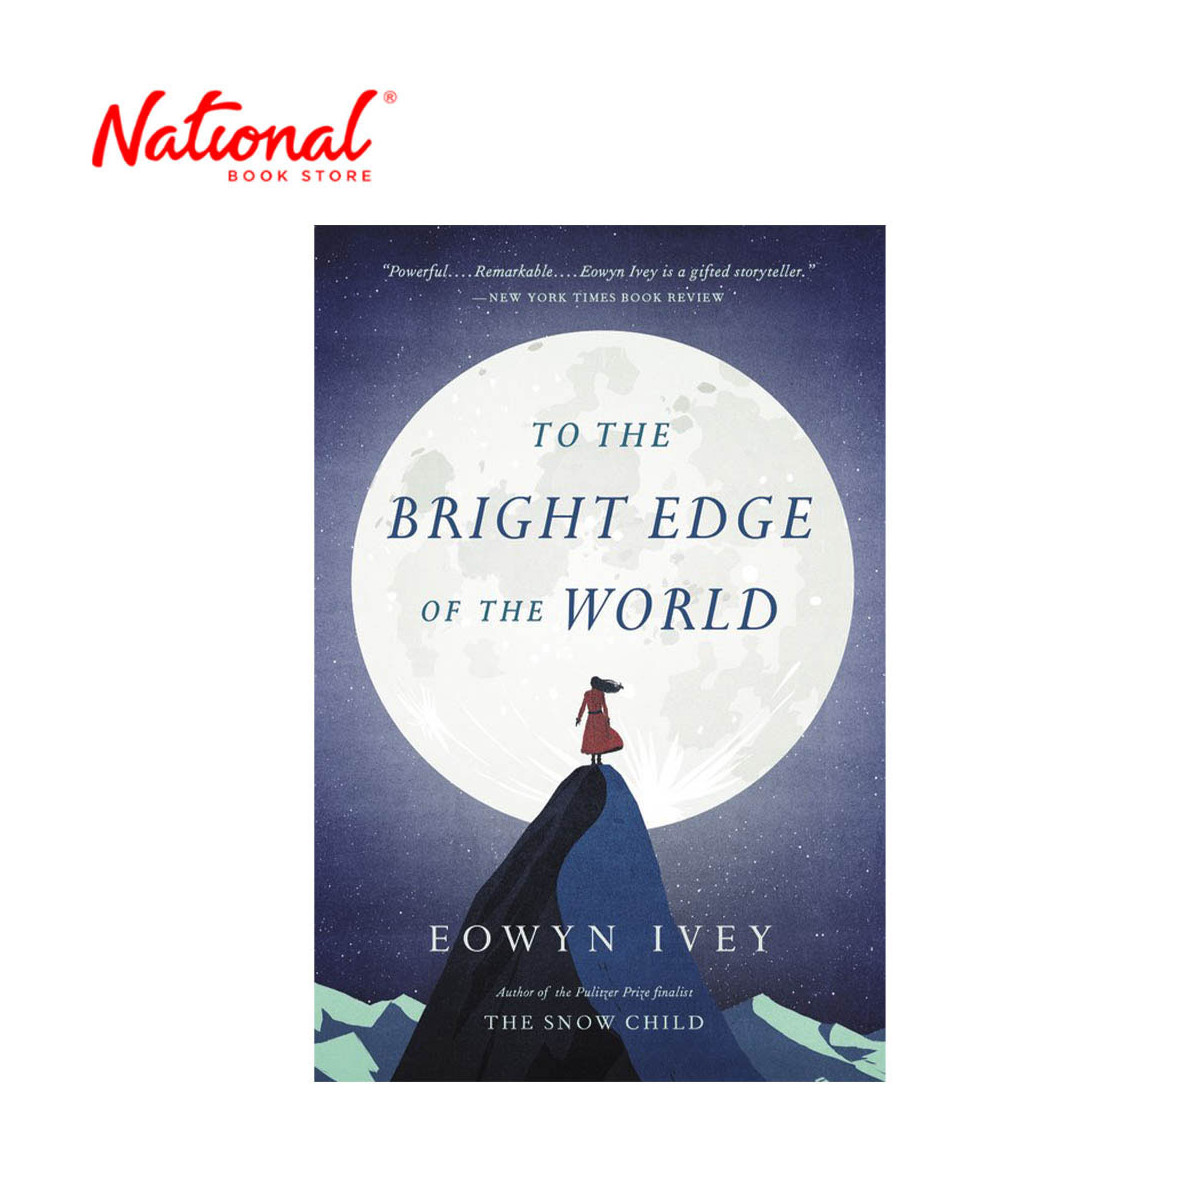 To The Bright Edge Of The World by Eowyn Ivey - Trade Paperback - Contemporary Fiction